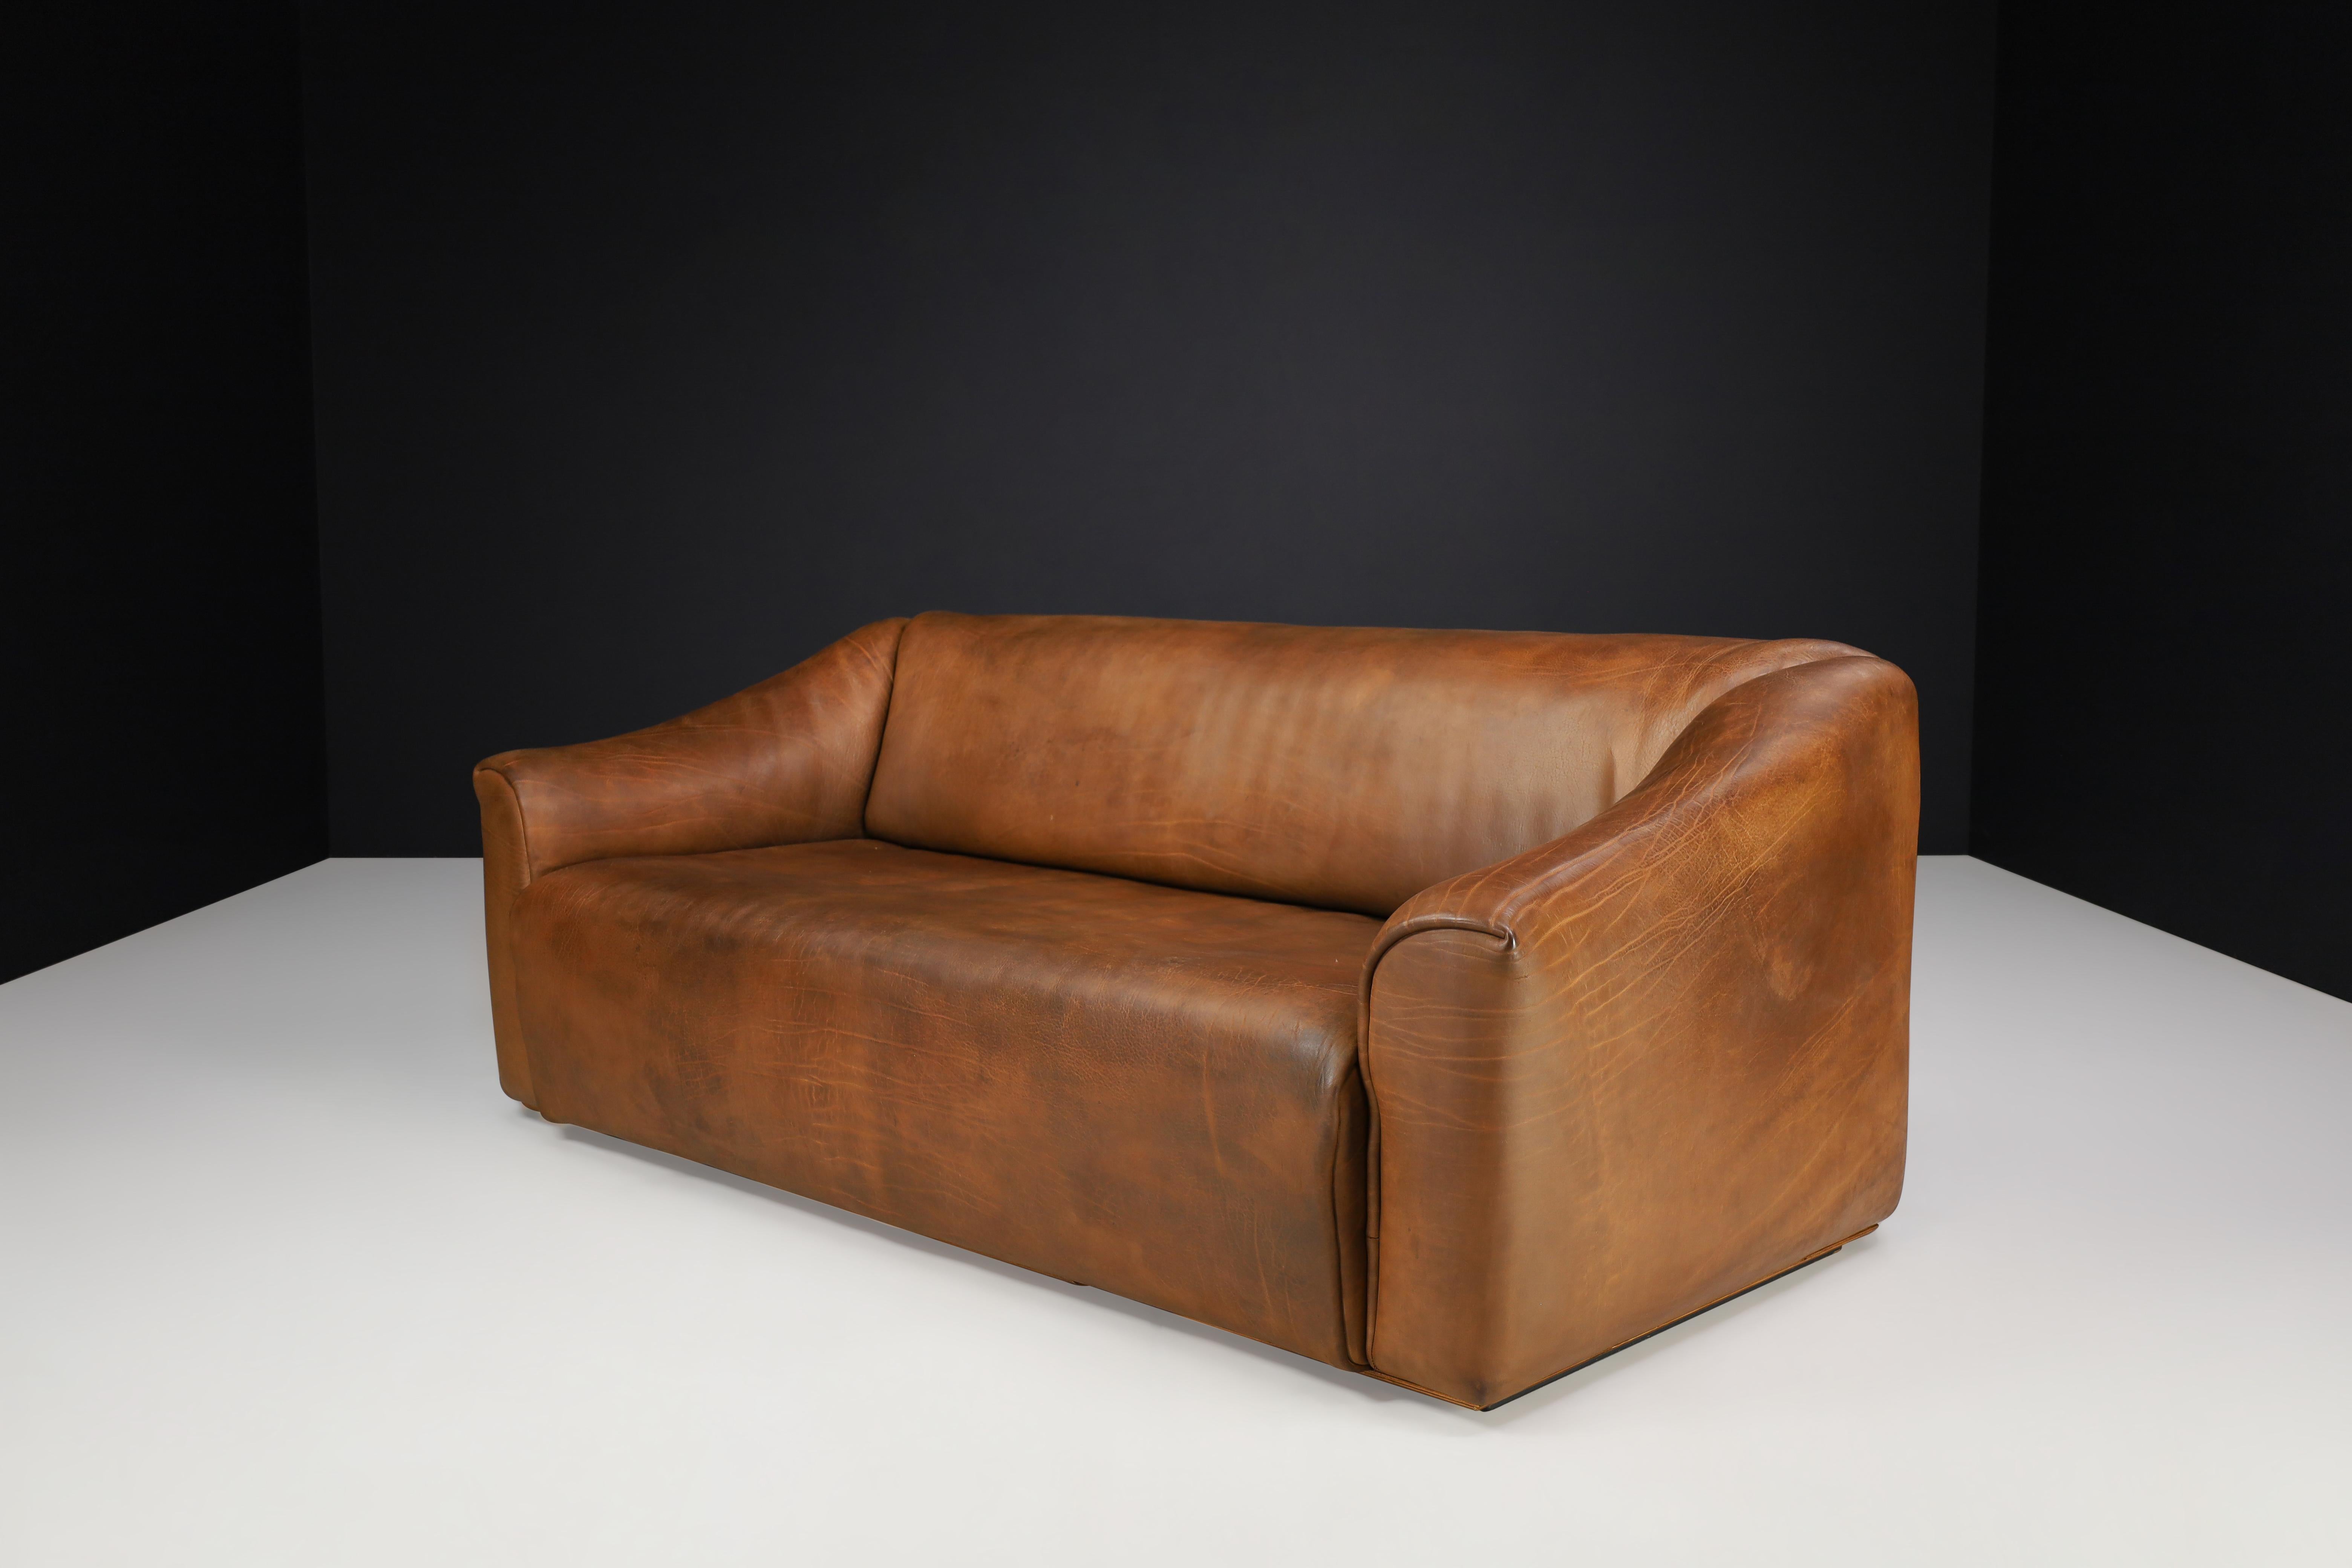 De Sede DS-47 neck leather sofa from Switzerland 1970s

Presenting a De Sede DS-47 Neck Leather Sofa from Switzerland, crafted in the 1970s. This sofa is a sturdy and comfortable piece, constructed with 5mm thick NECK leather, boasting unique